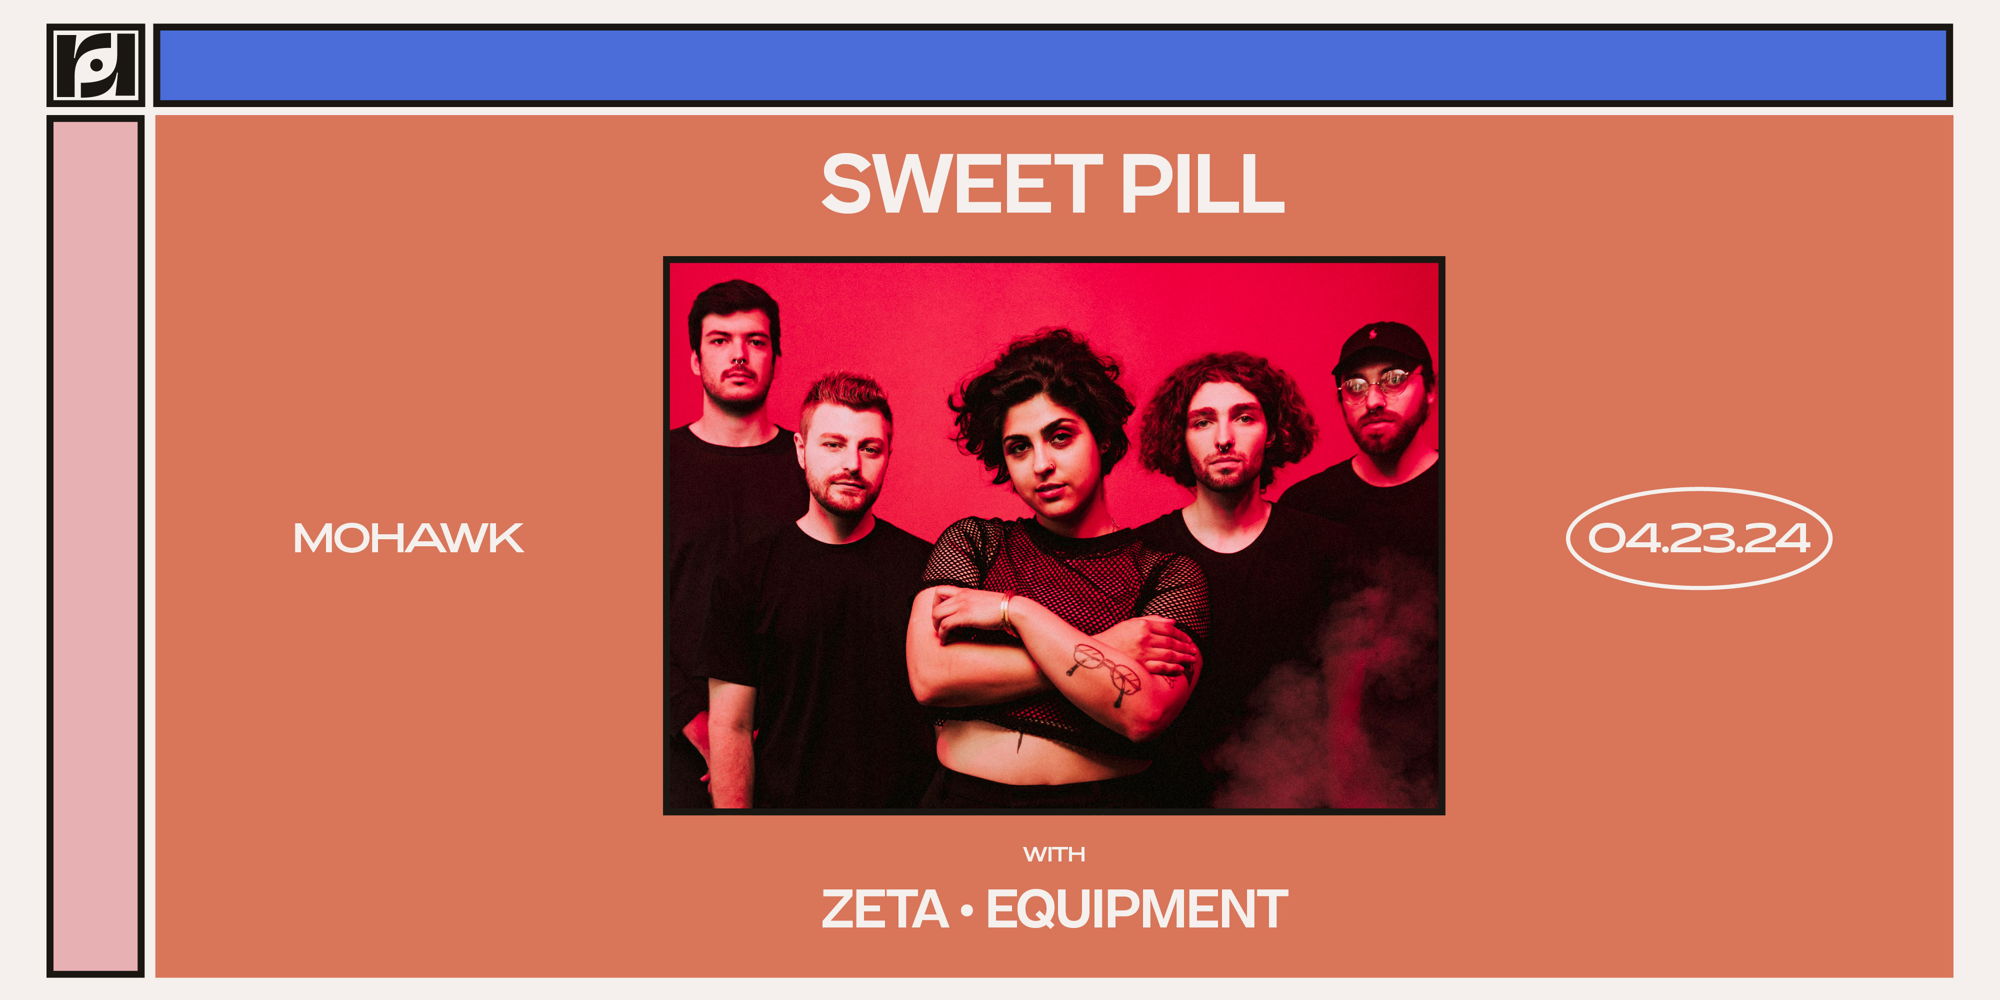 Resound Presents: Sweet Pill w/ Zeta and Equipment at Mohawk promotional image